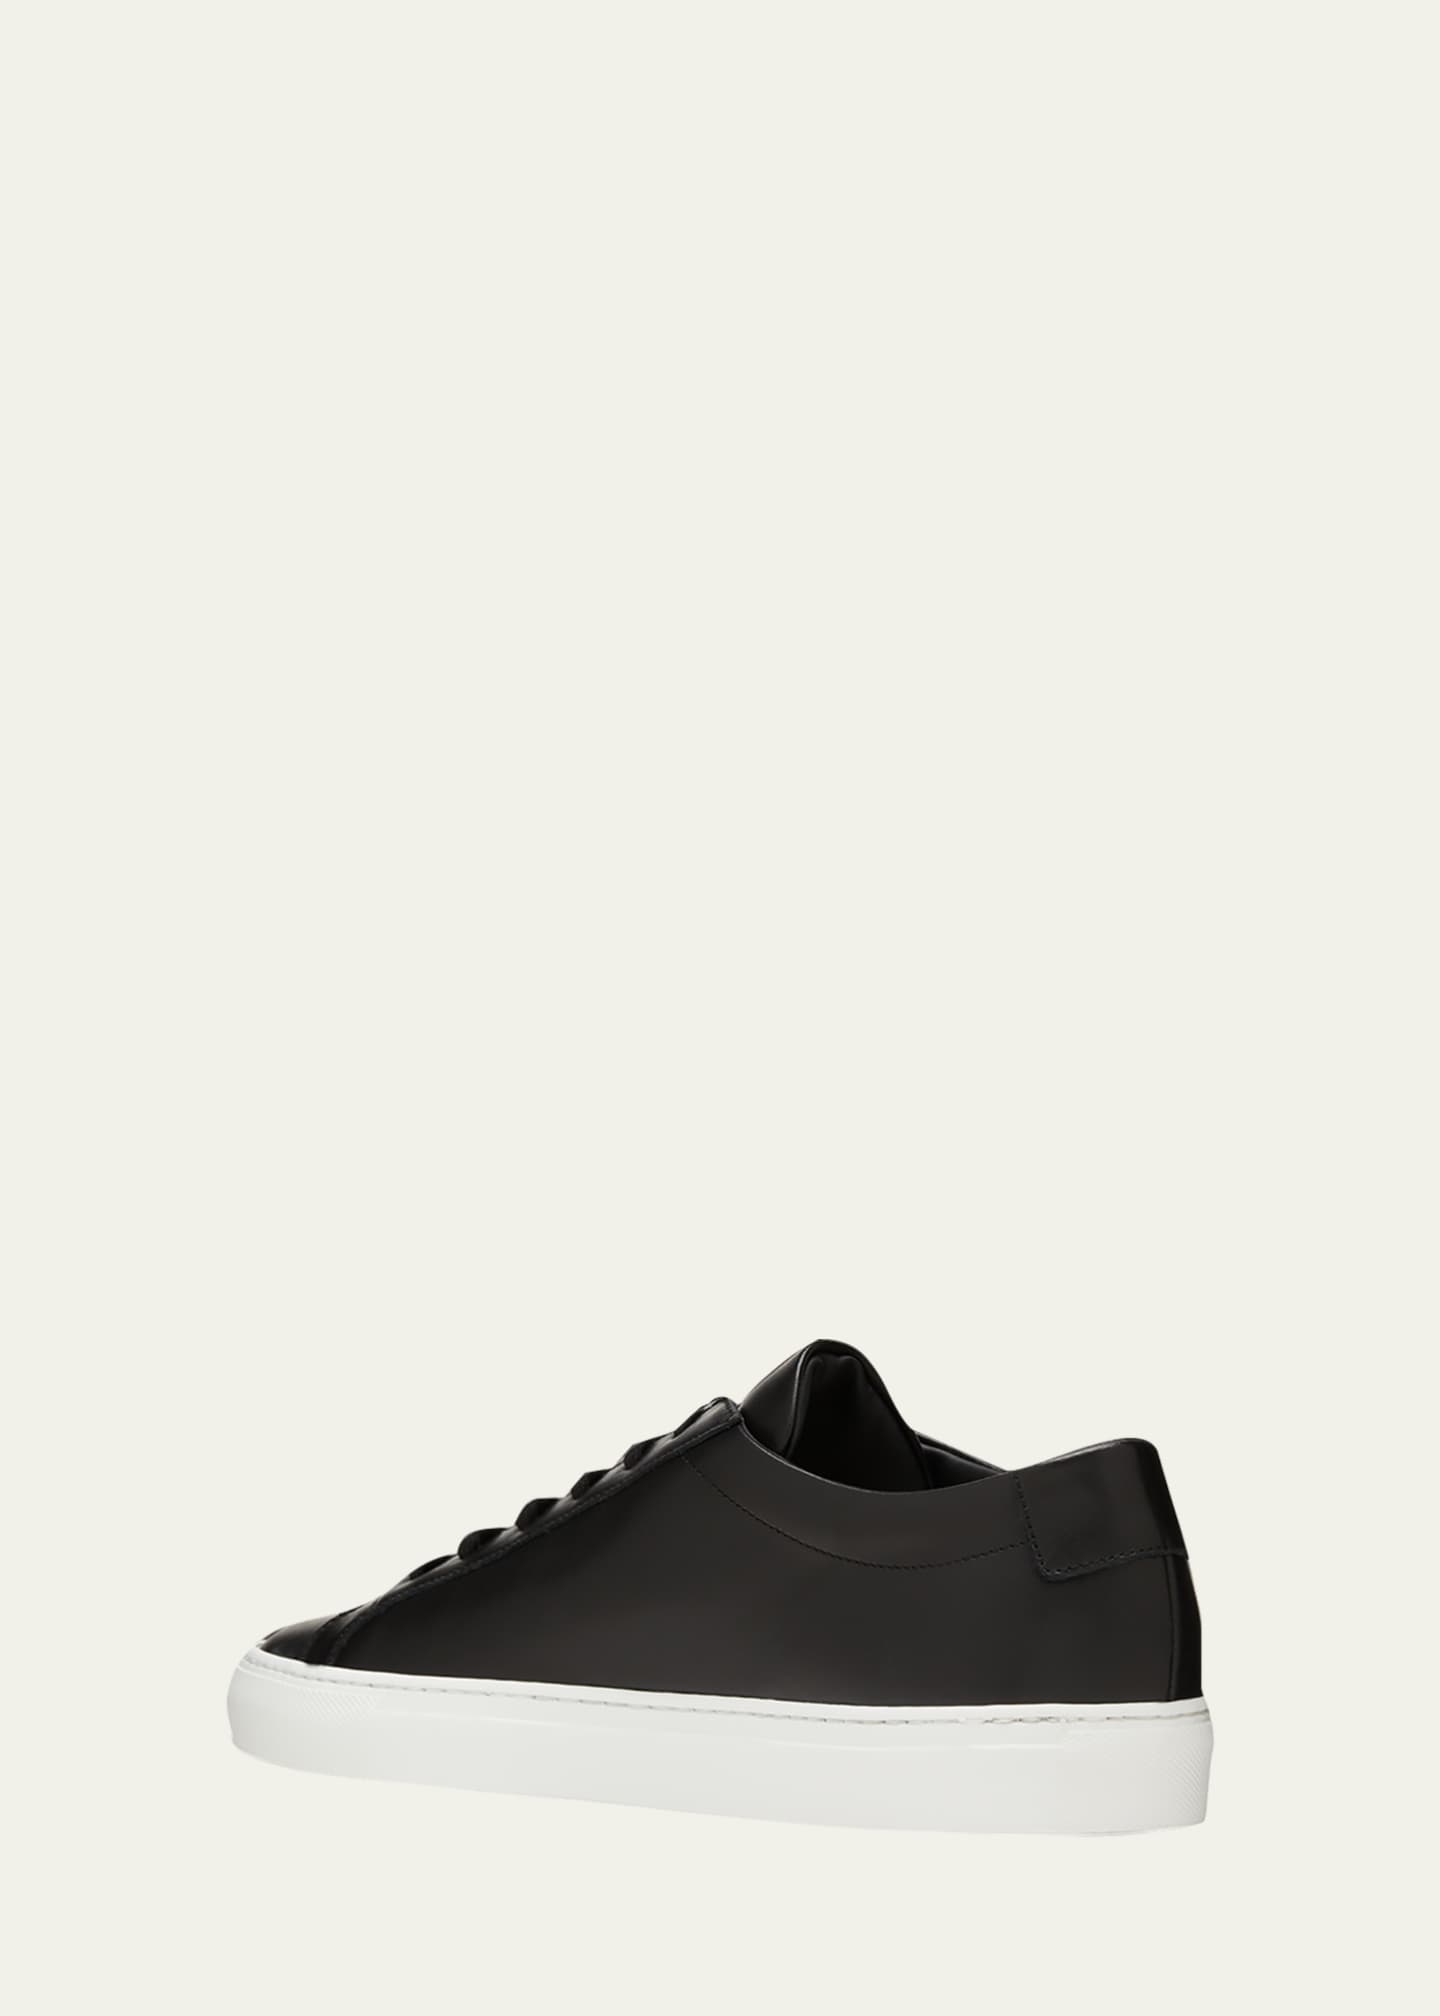 Common Projects Men's Achilles Leather Low-Top Sneakers - Bergdorf Goodman